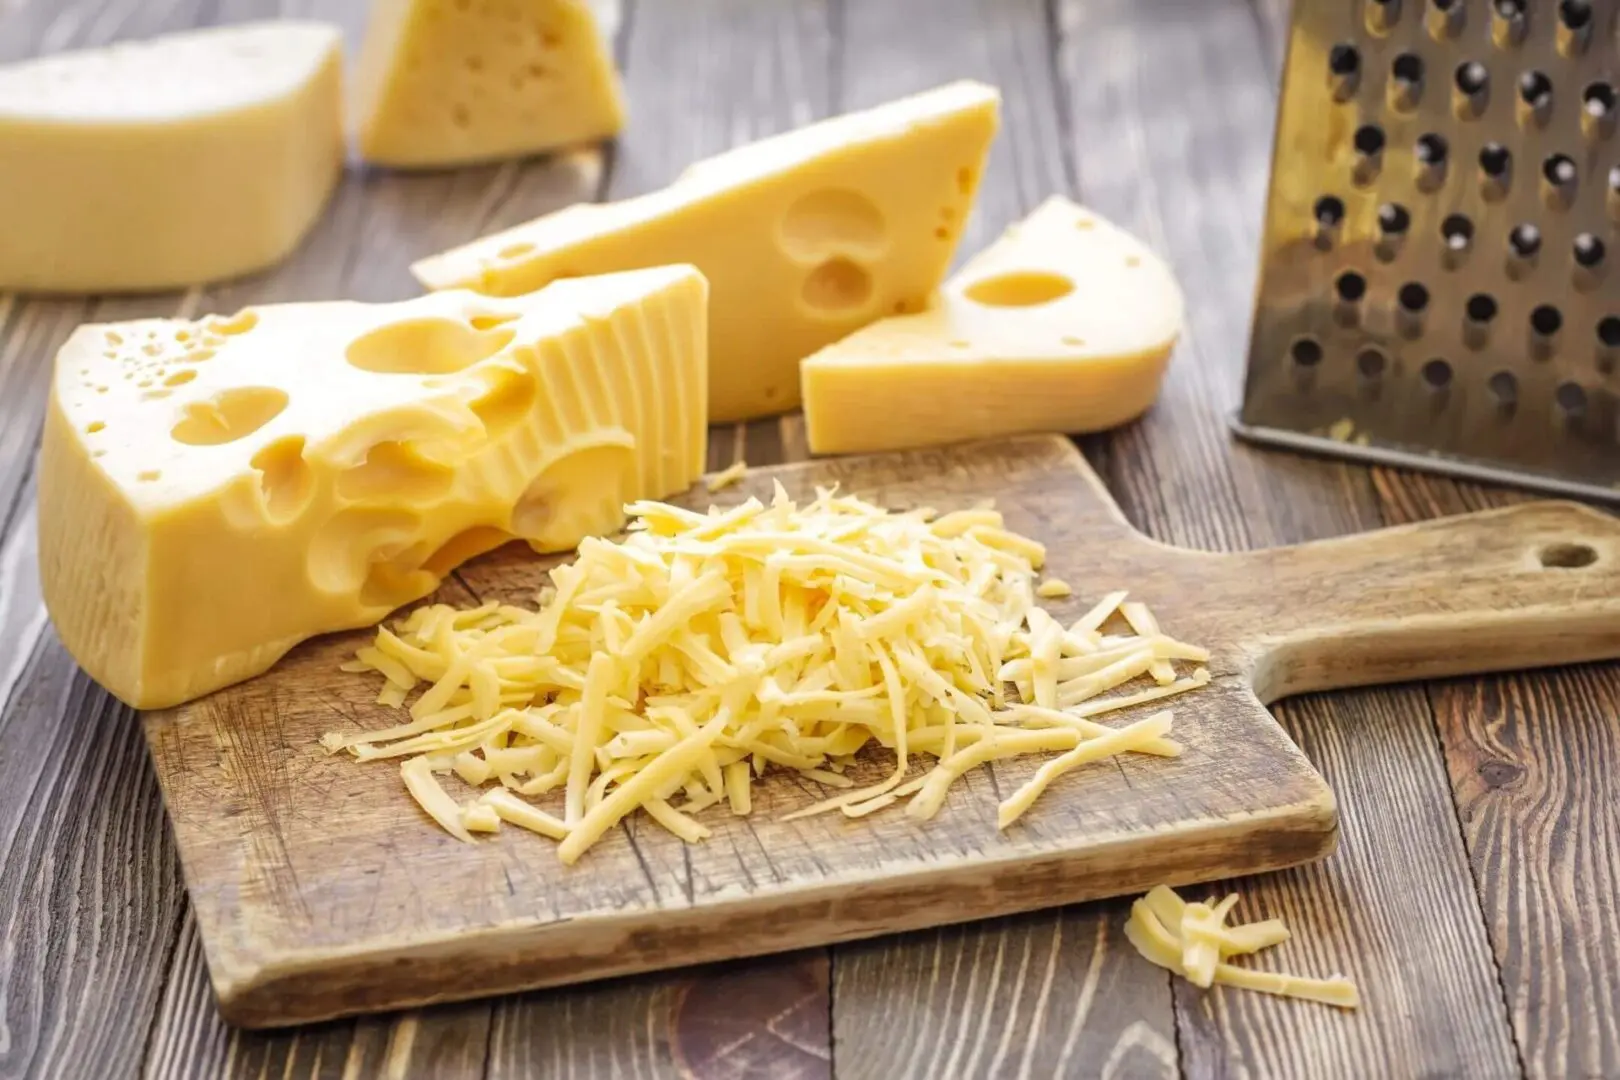 Cheese blocks and grated cheese